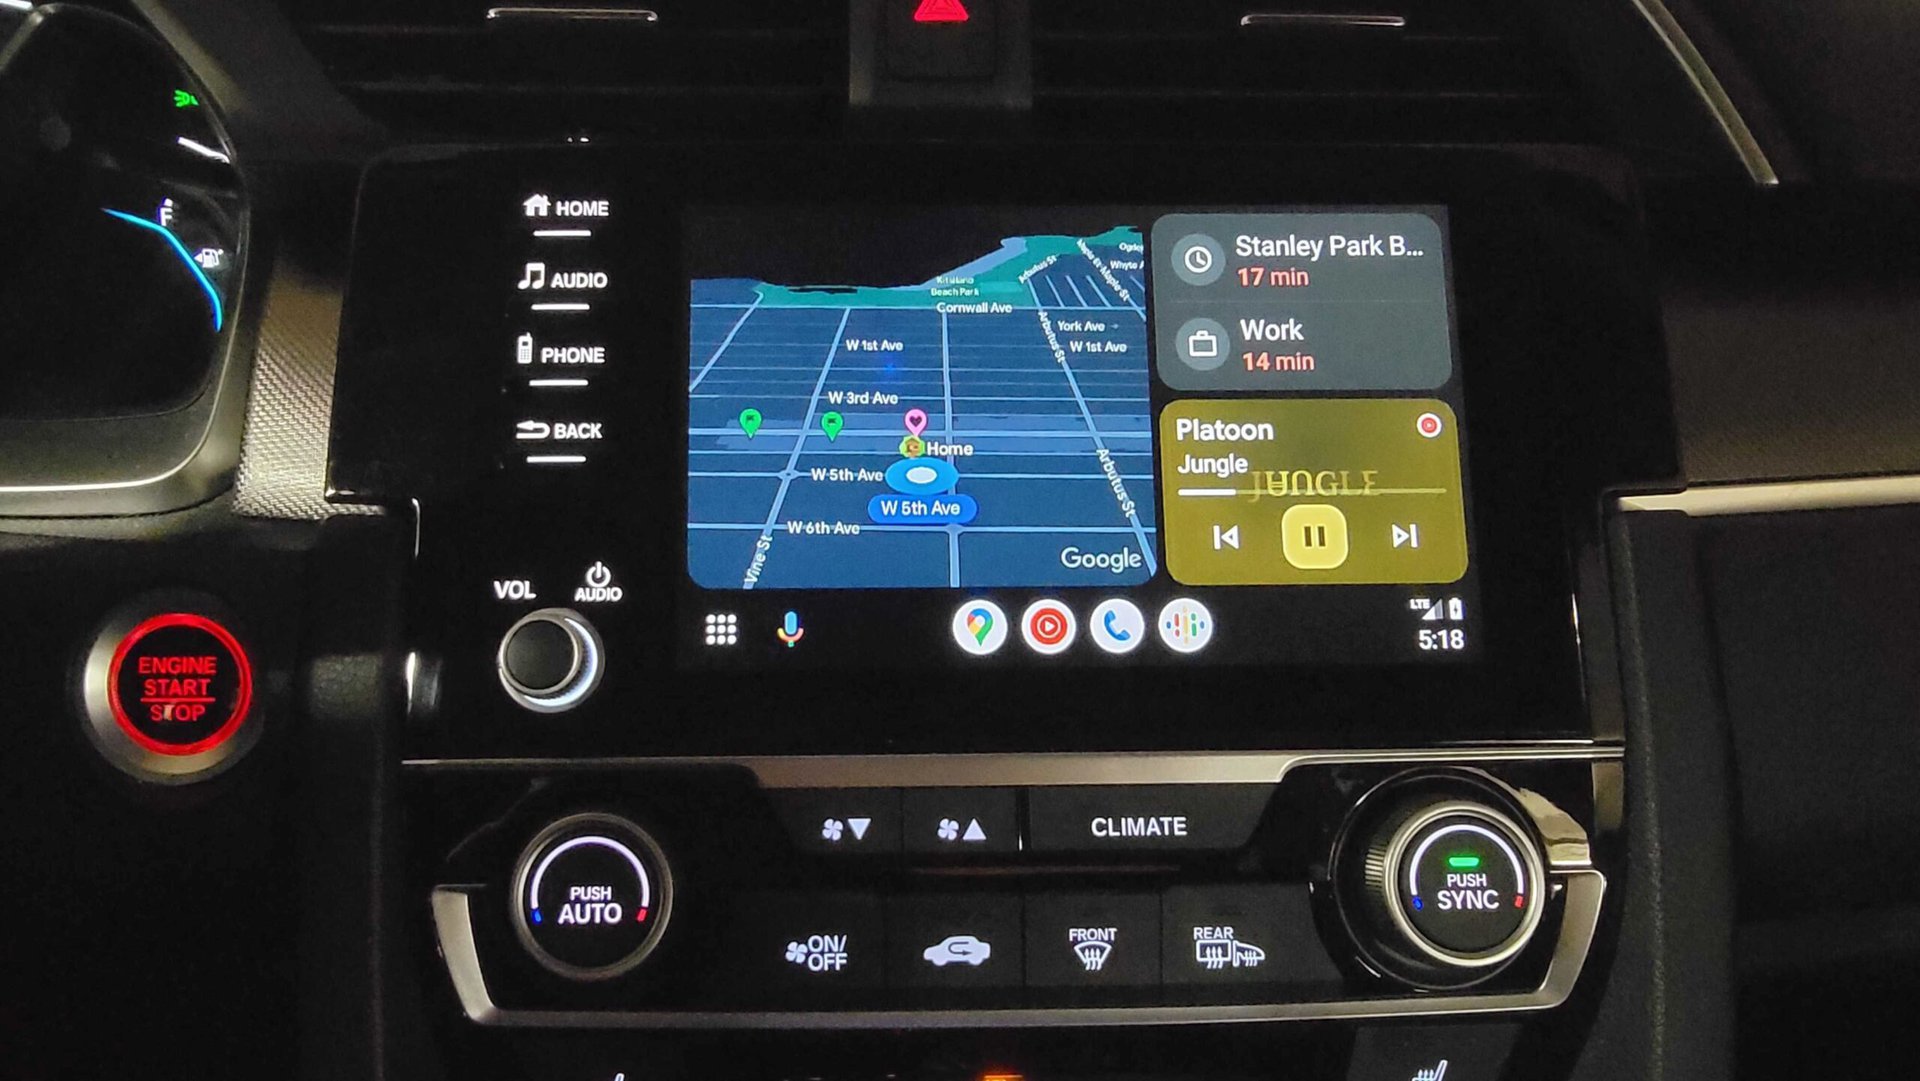 Google Releases Android Auto 11: How to Download It Right Now